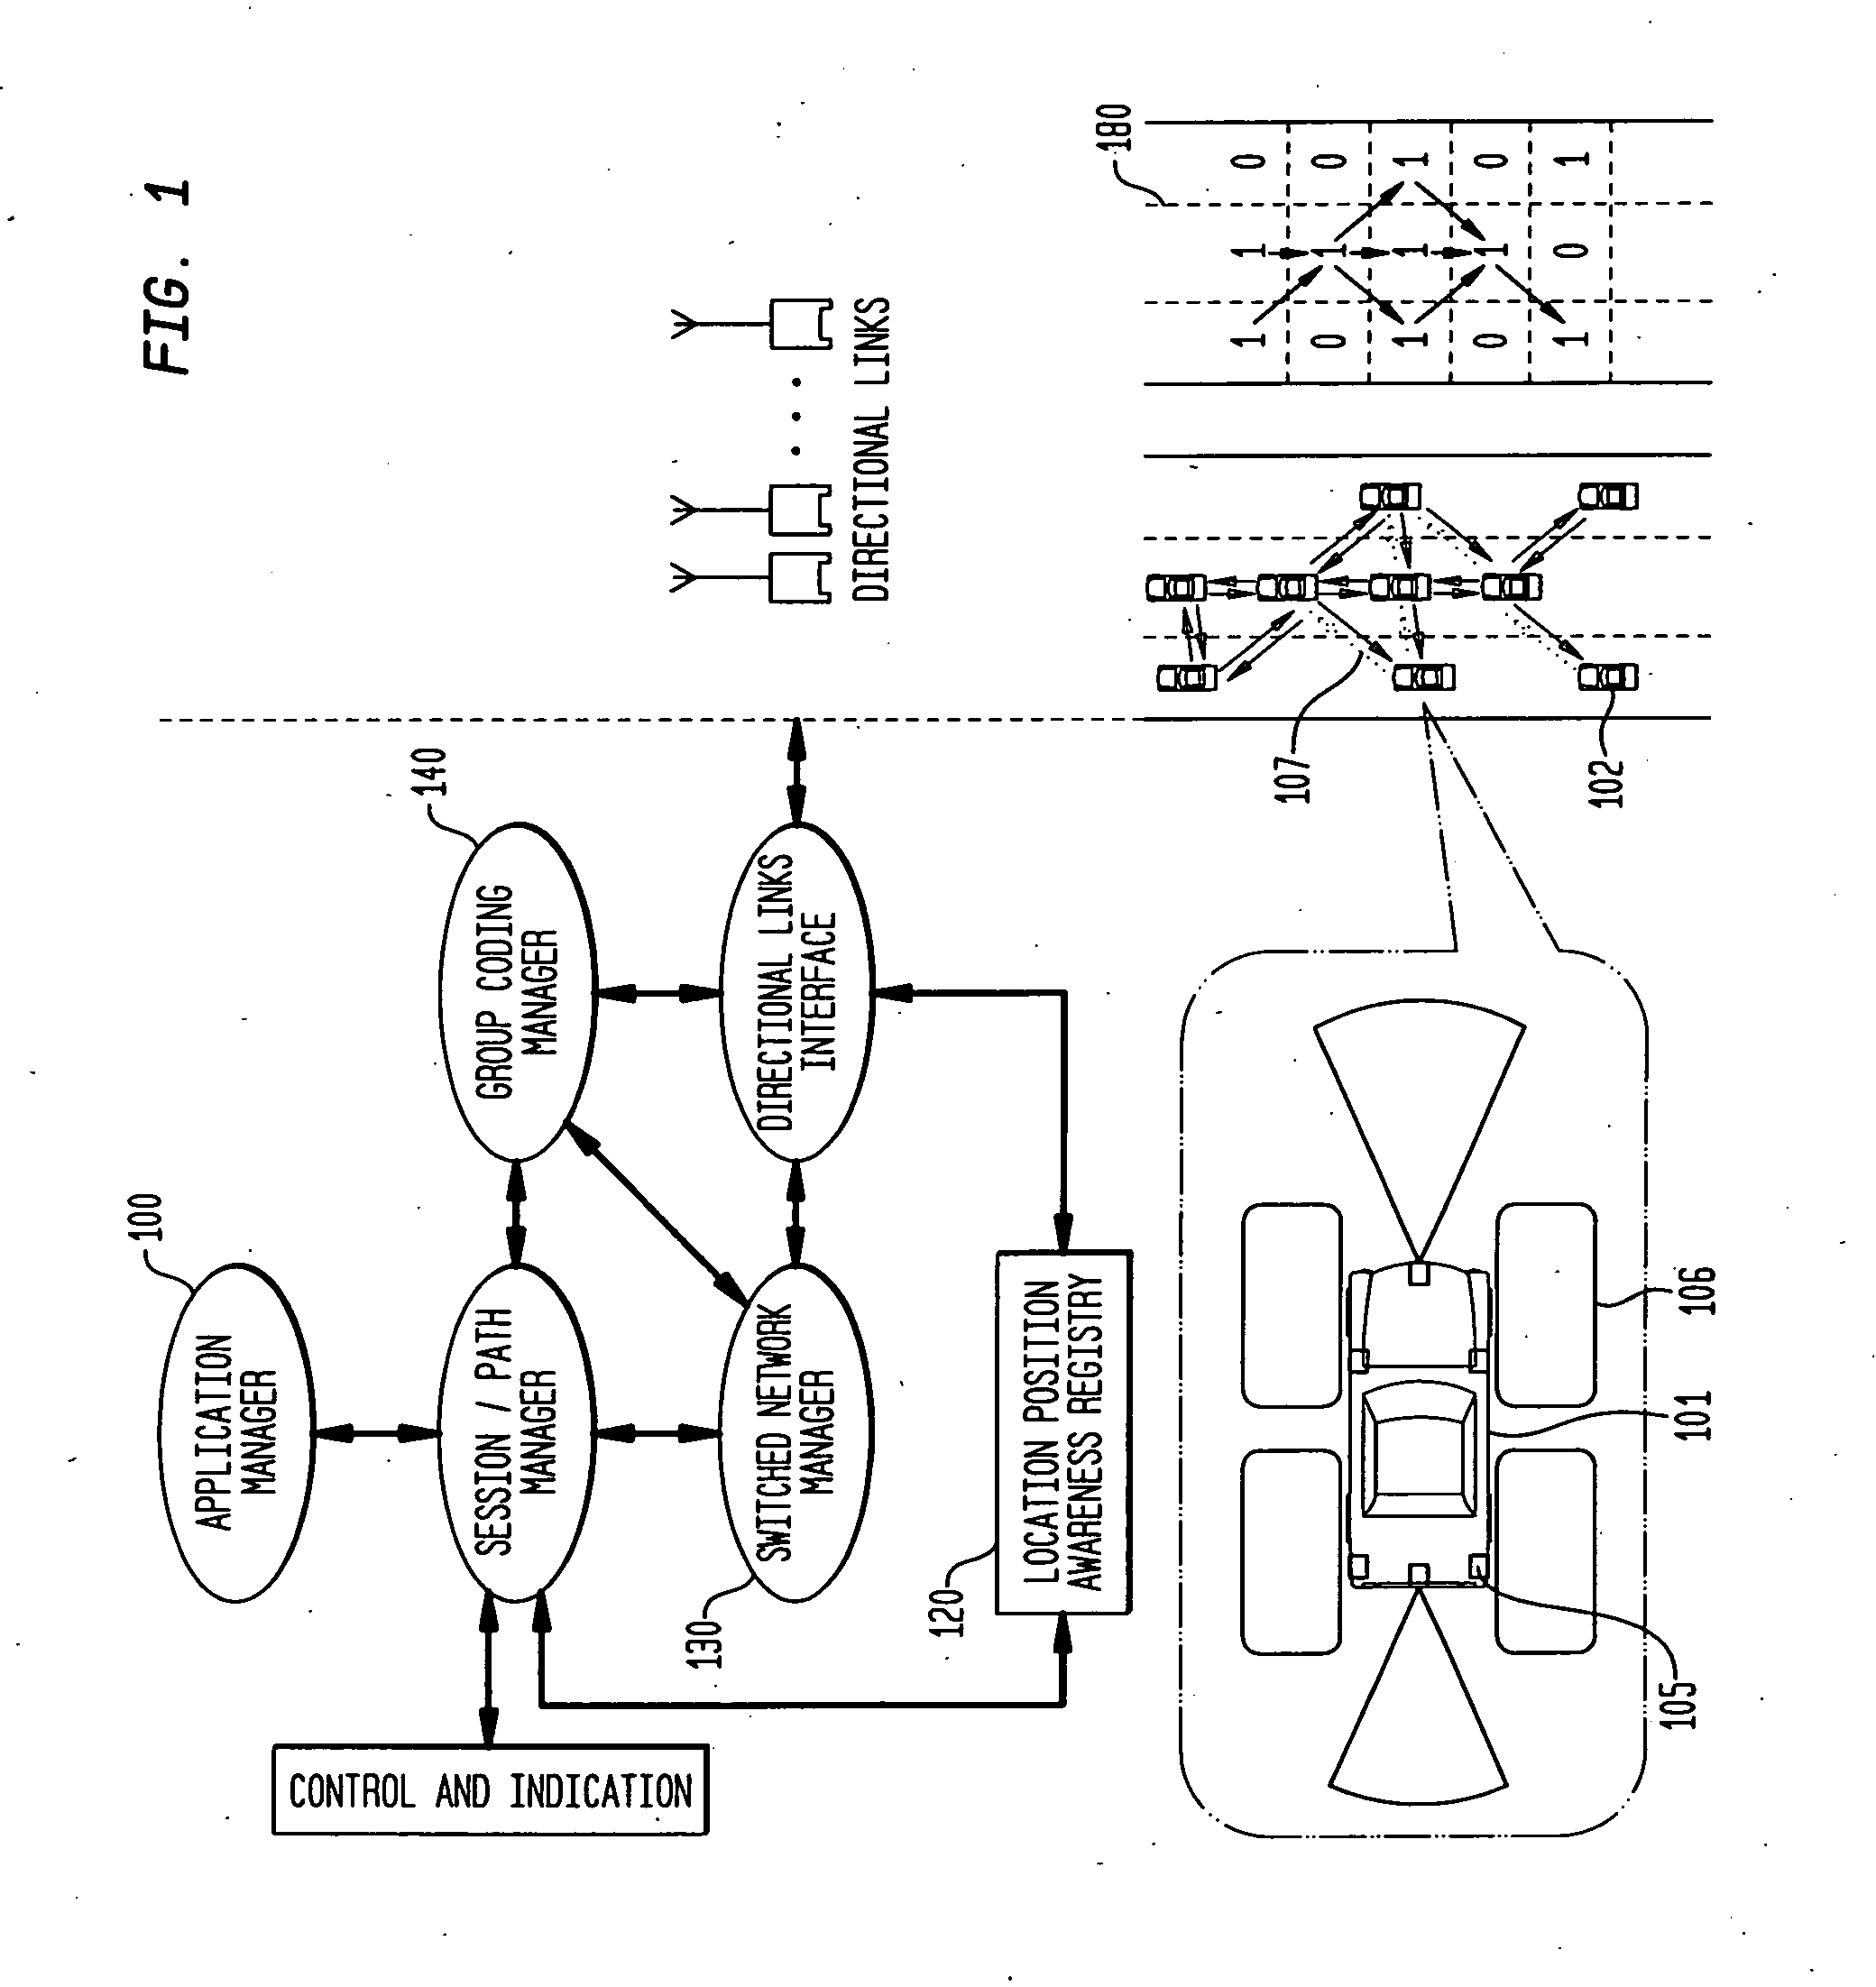 Systems and Methods for Multi-Beam Optic-Wireless Vehicle Communications